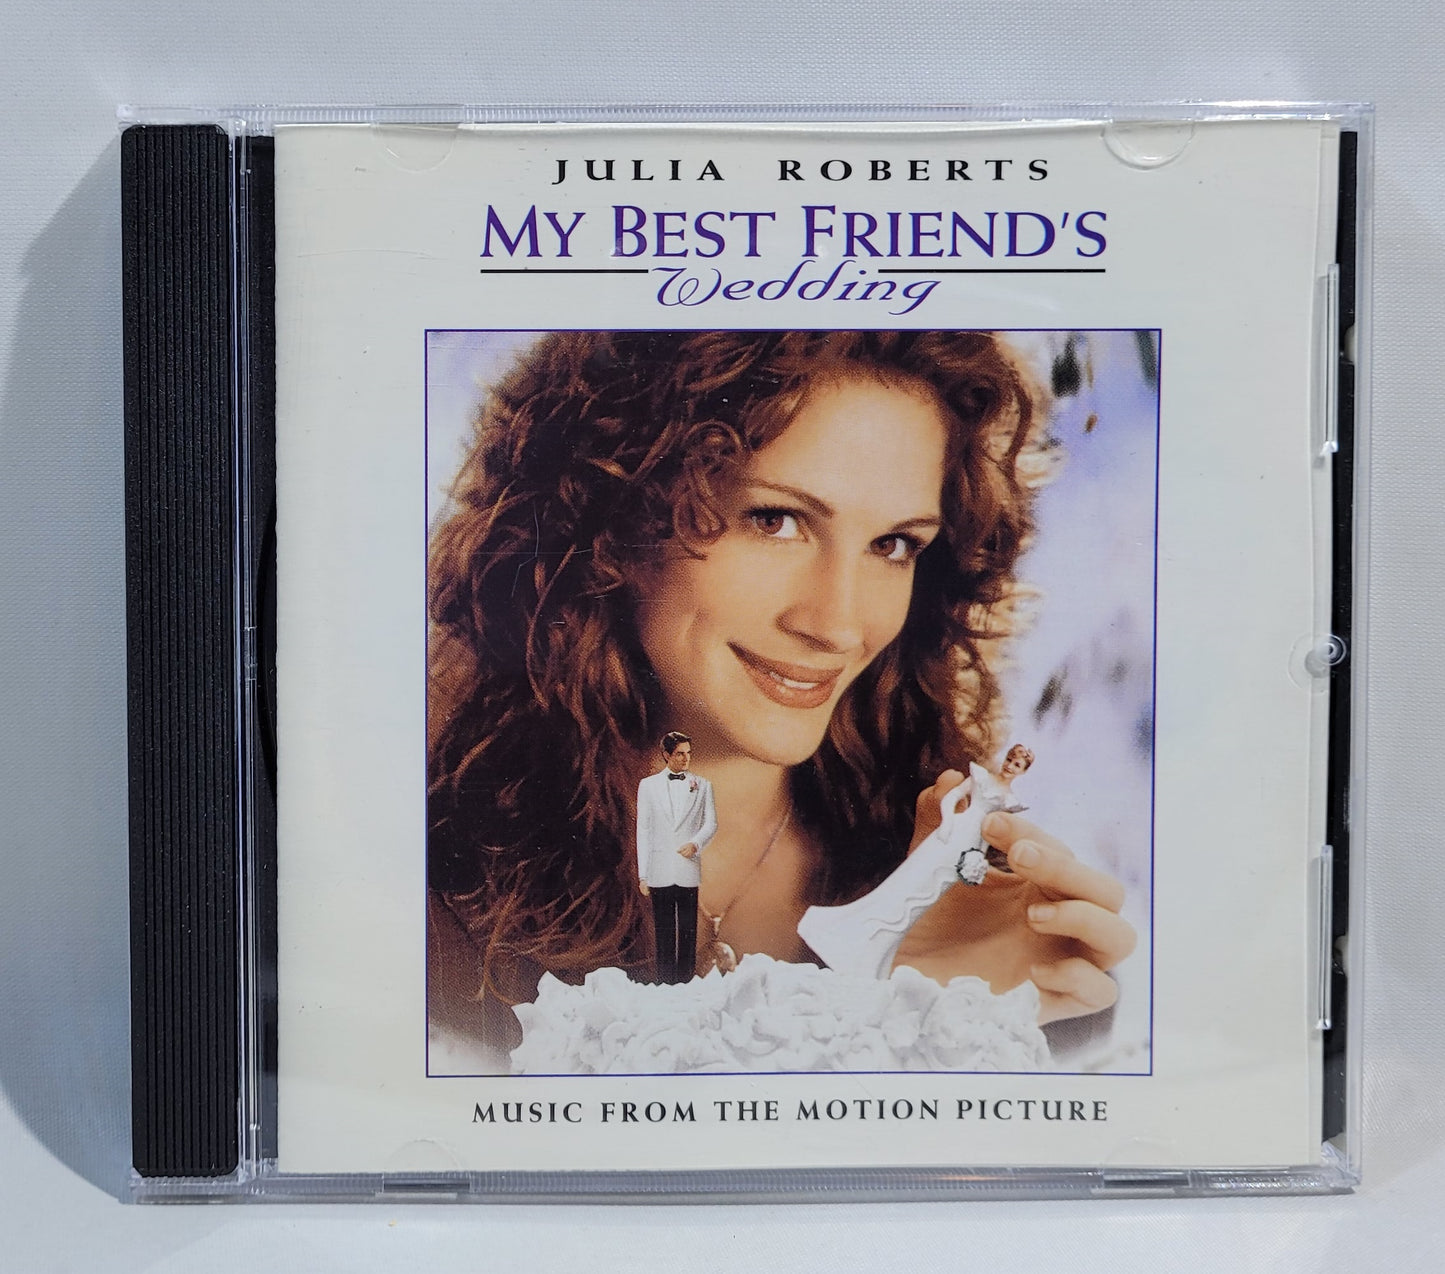 Soundtrack - My Best Friend's Wedding (Music From the Motion Picture) [CD] [B]